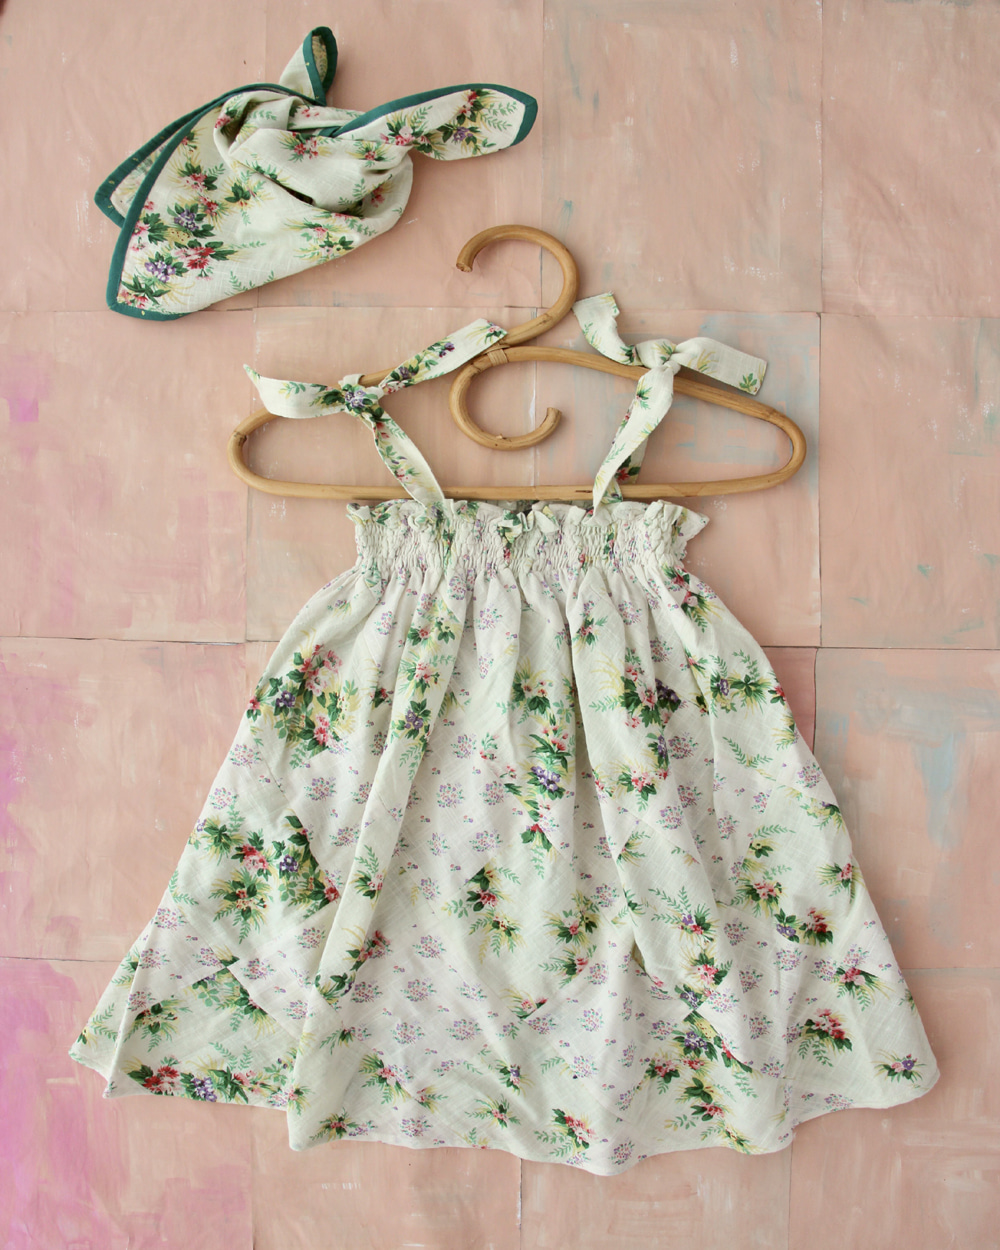 [BONJOUR]Patchwork Skirt Dress with Scarf /Green gold dot fabric [4Y,6Y,8Y,10Y]